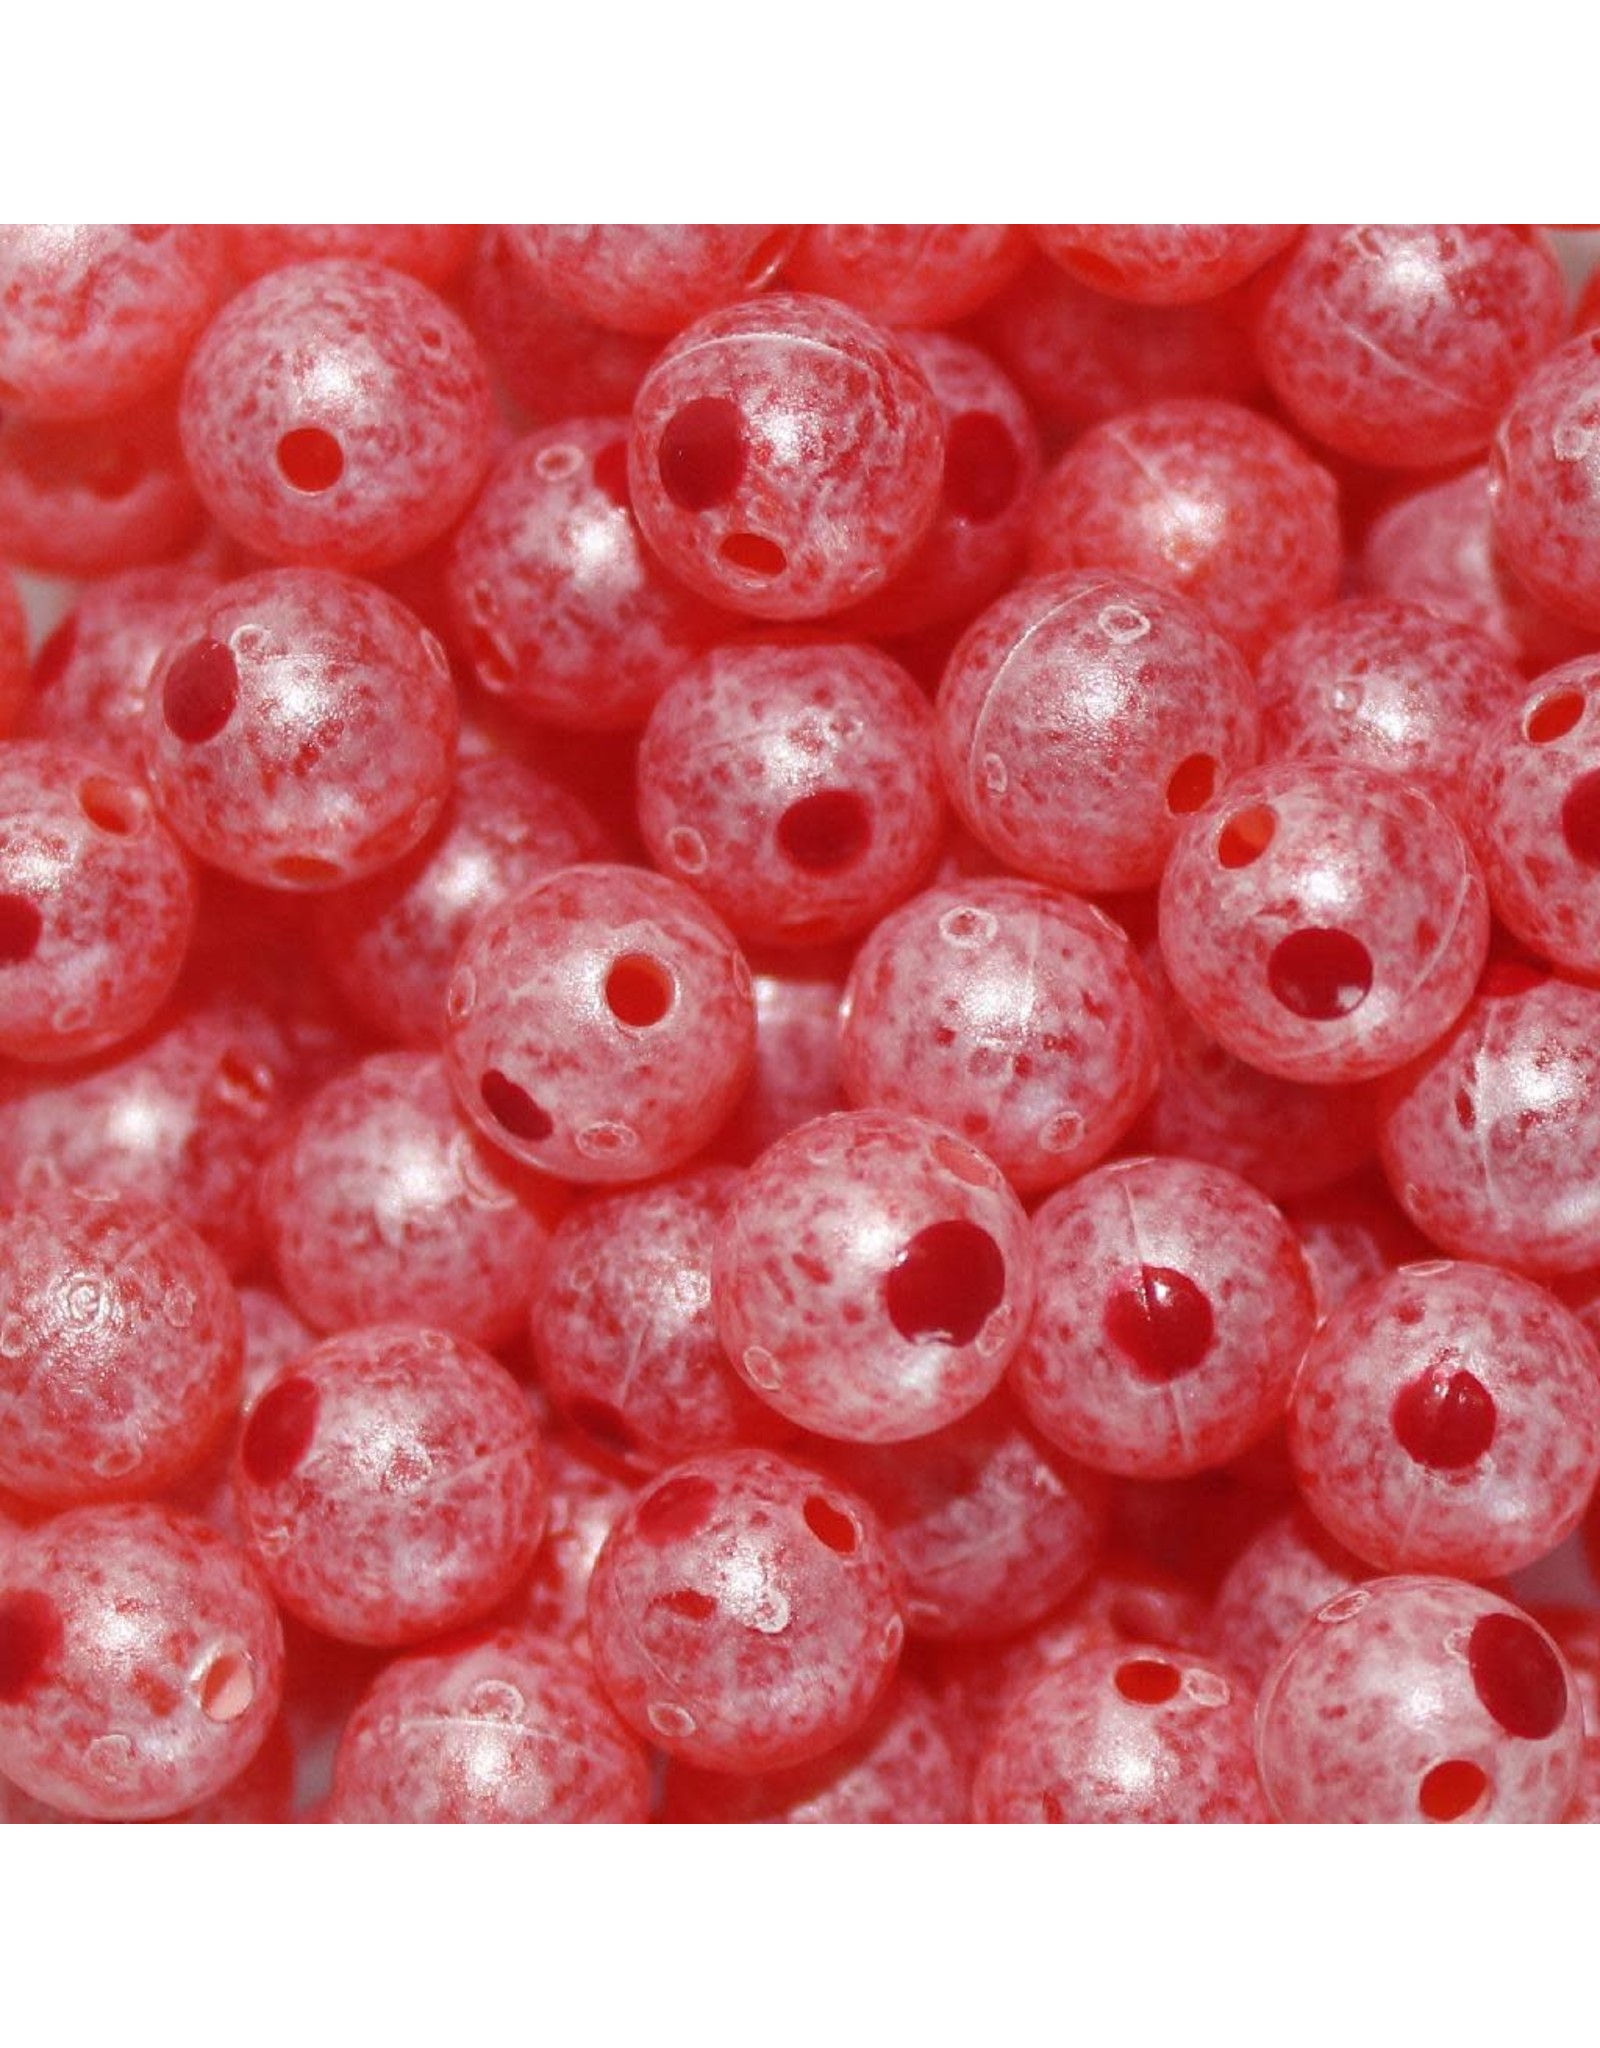 Trout Bead Blood Dot - 10 mm Dark Roe - 10 Count